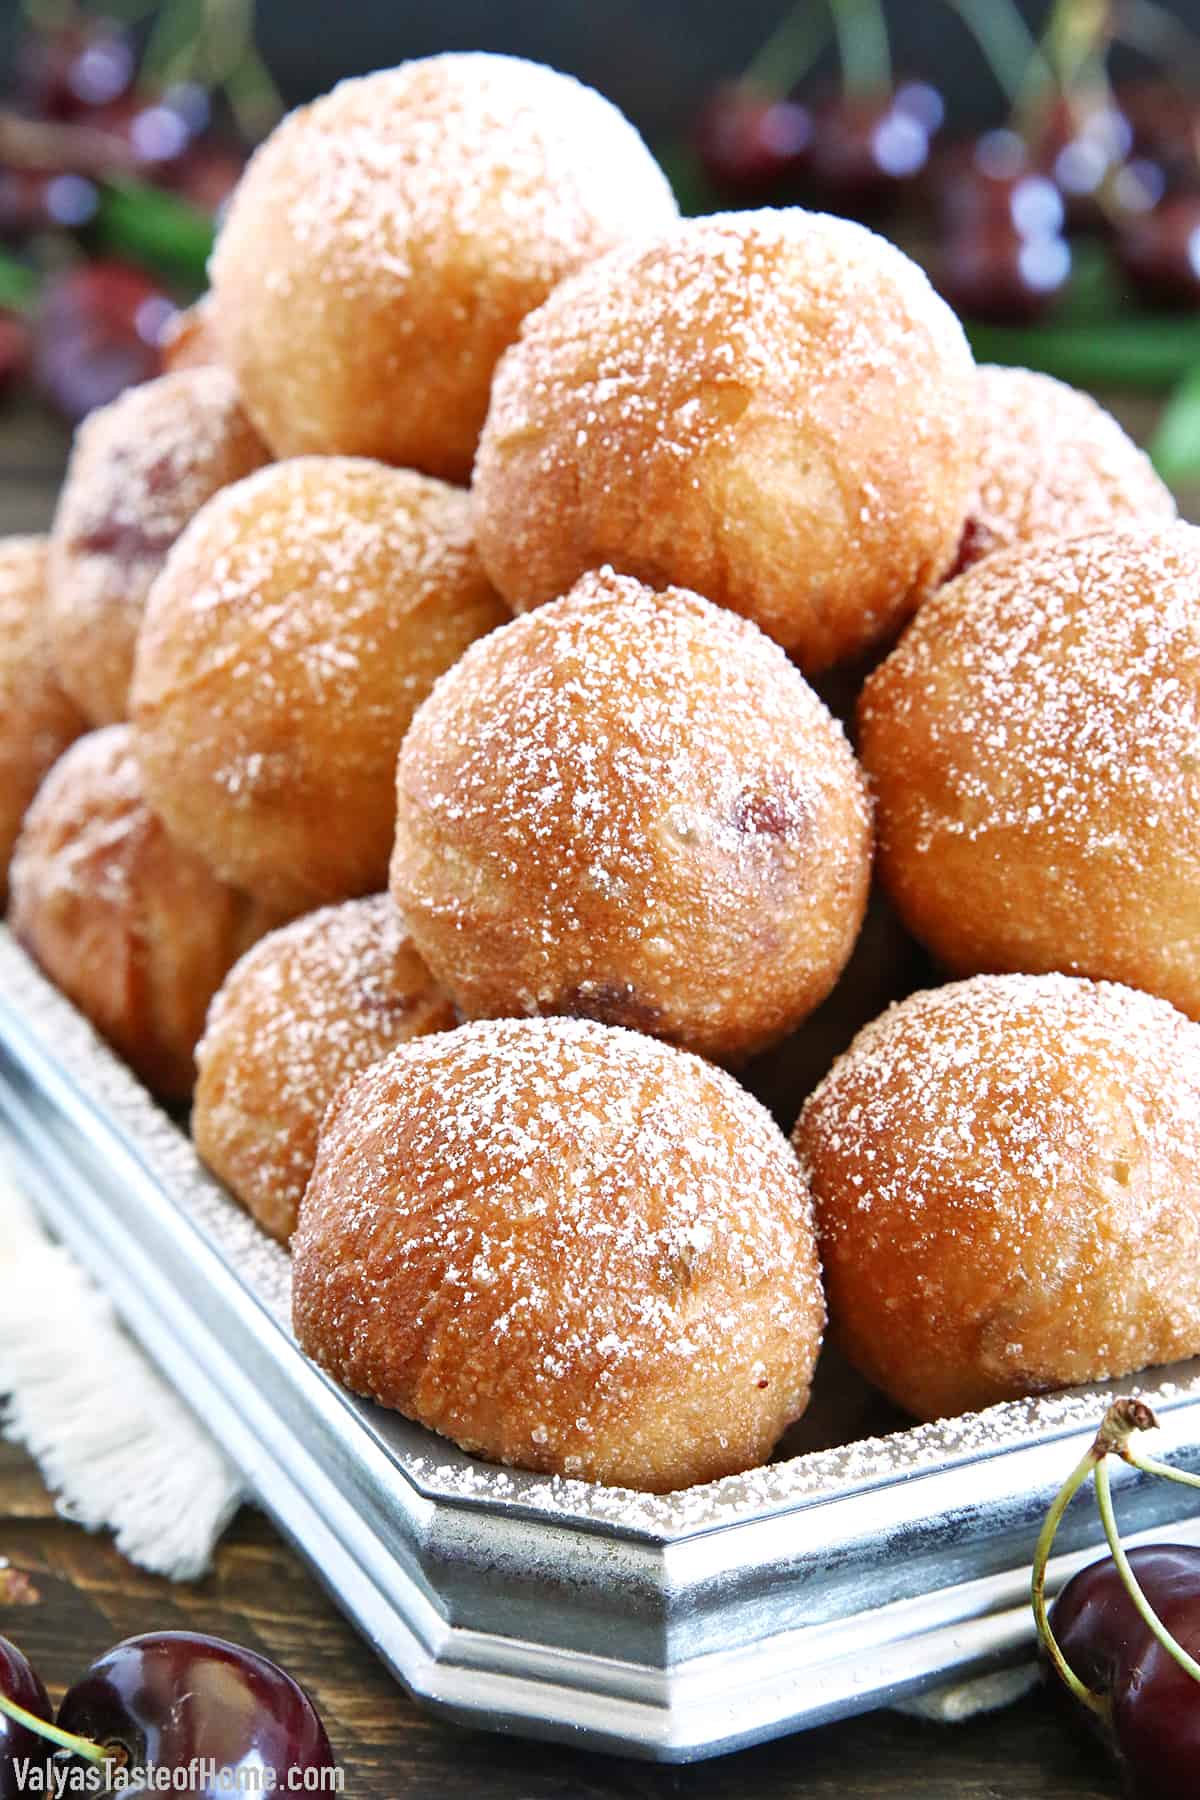 Ponchiki are delicious donut holes that are a beloved treat in Russia and Ukraine and are known for their soft, fluffy texture and burst of sweet cherry goodness.